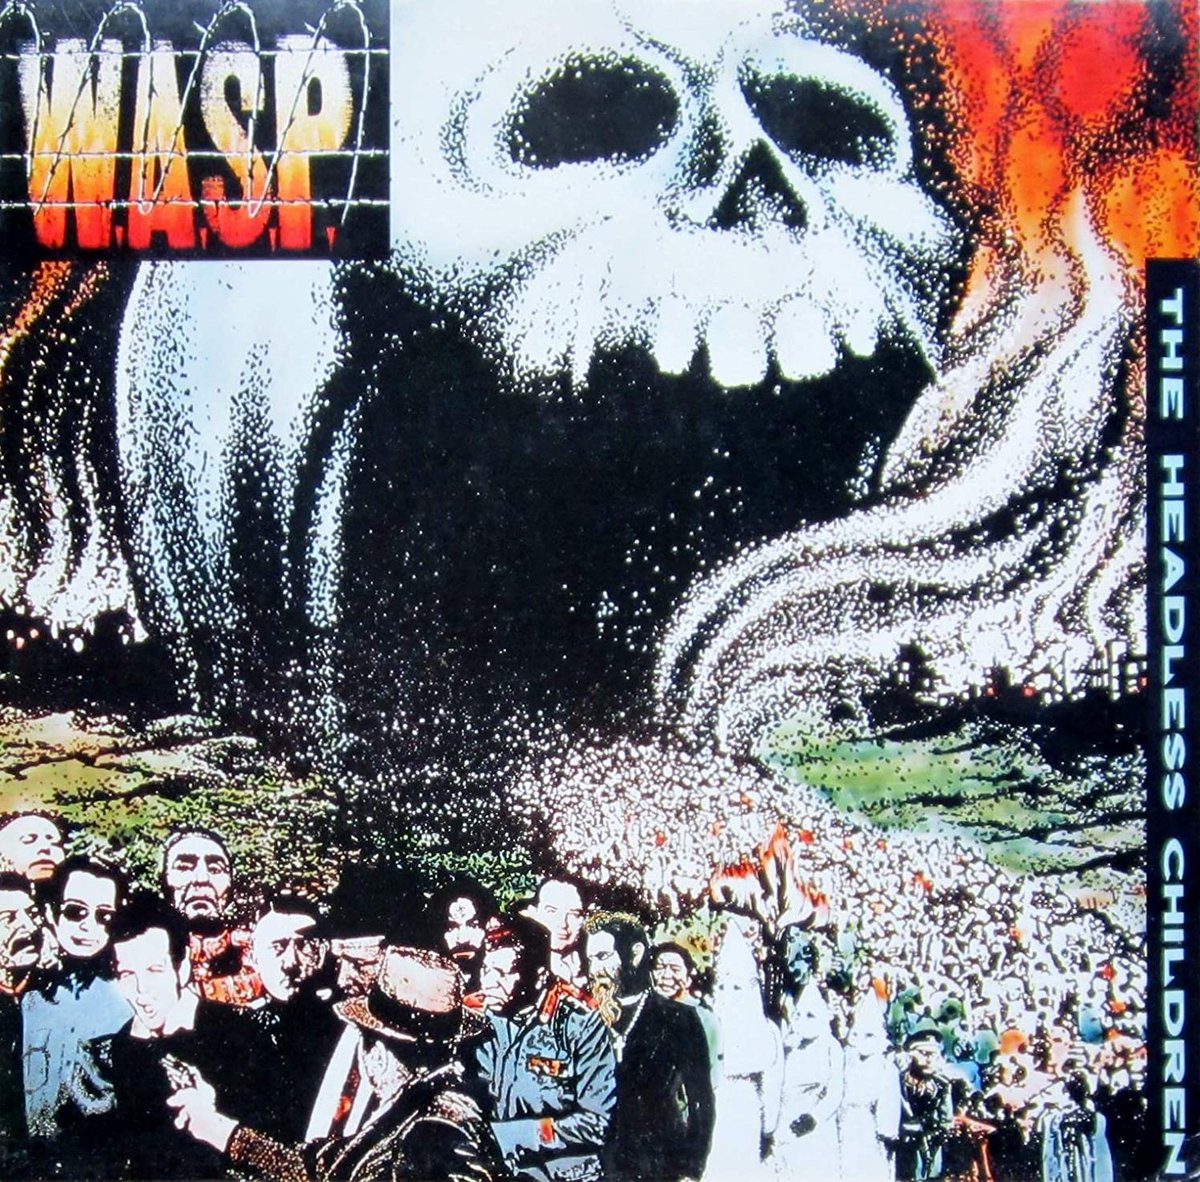 Morning Heavy Metal #RockOn Happy 34th anniversary
of this jewel! 🎂 
Possibly one of W.A.S.P.’s best albums. Do you agree?
#WASP #34thAnniversary #TheHeadlessChildren